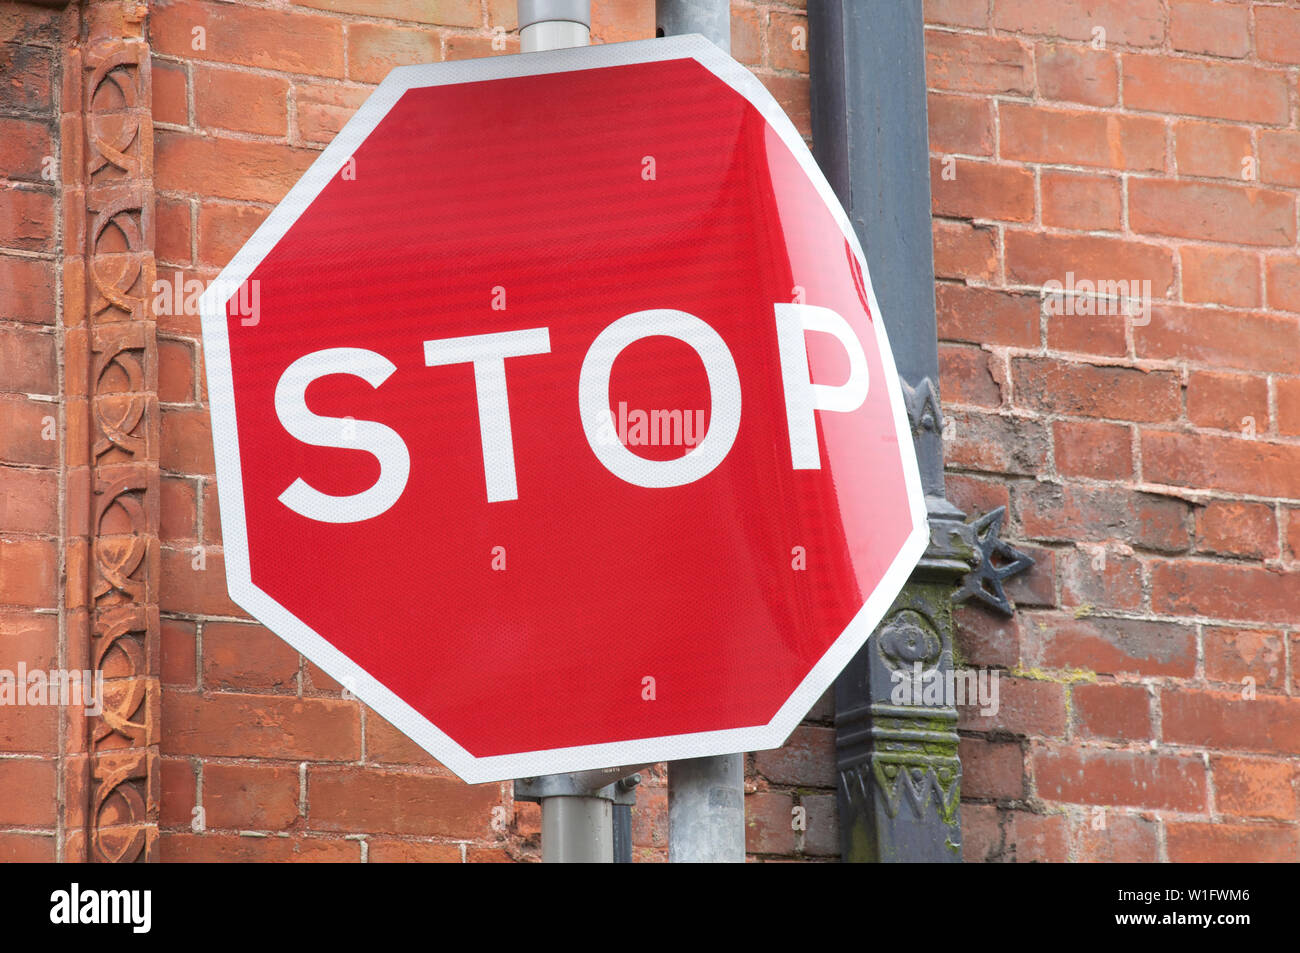 STOP! Oops too late. An octagonal red stop sign at a narrow and restricted street junction. Traffic sign bent out of shape by a collision. England, UK. Stock Photo